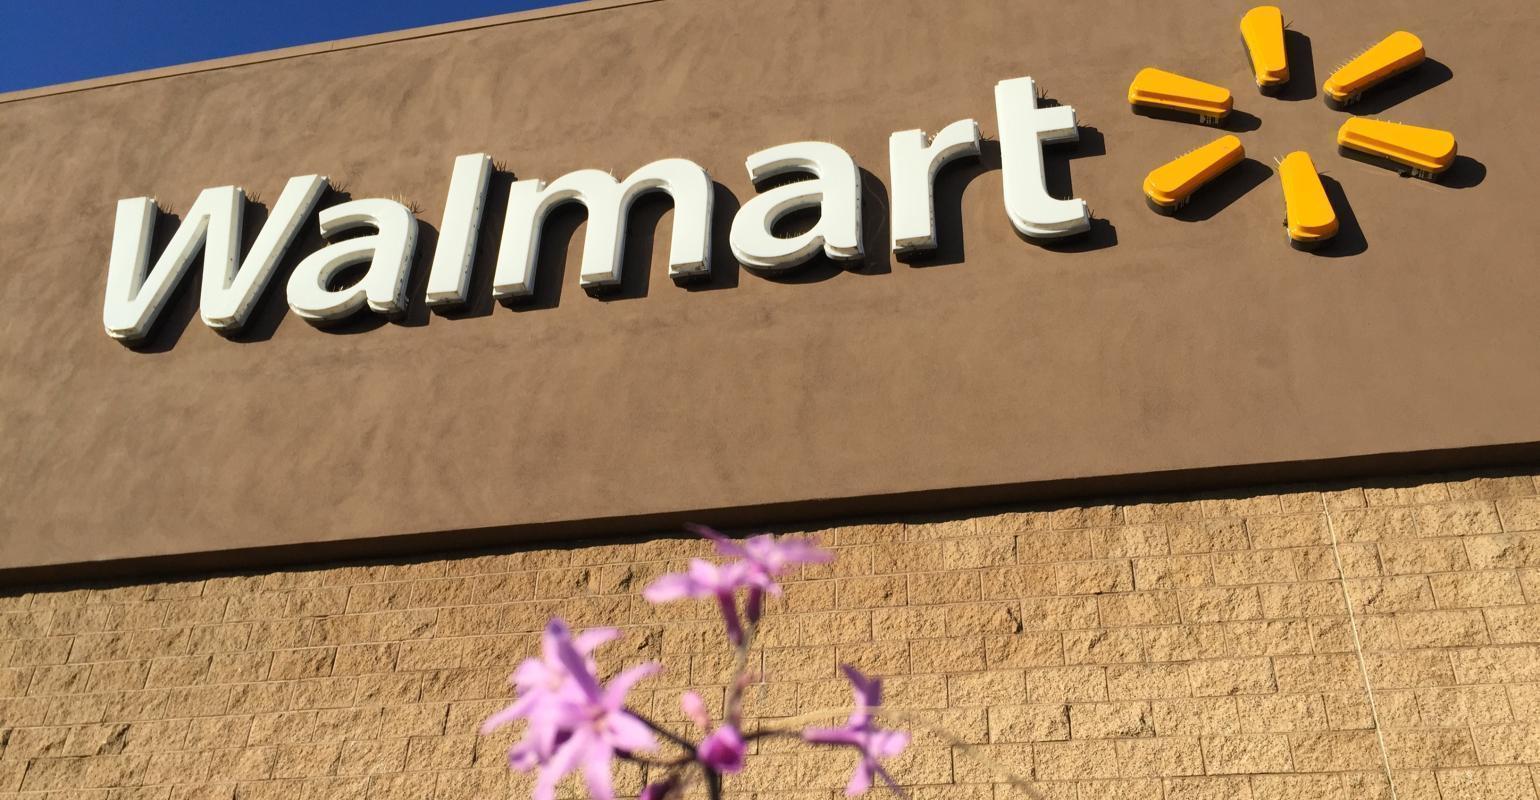 Here’s Walmart’s take on future shopping and adaptive retail